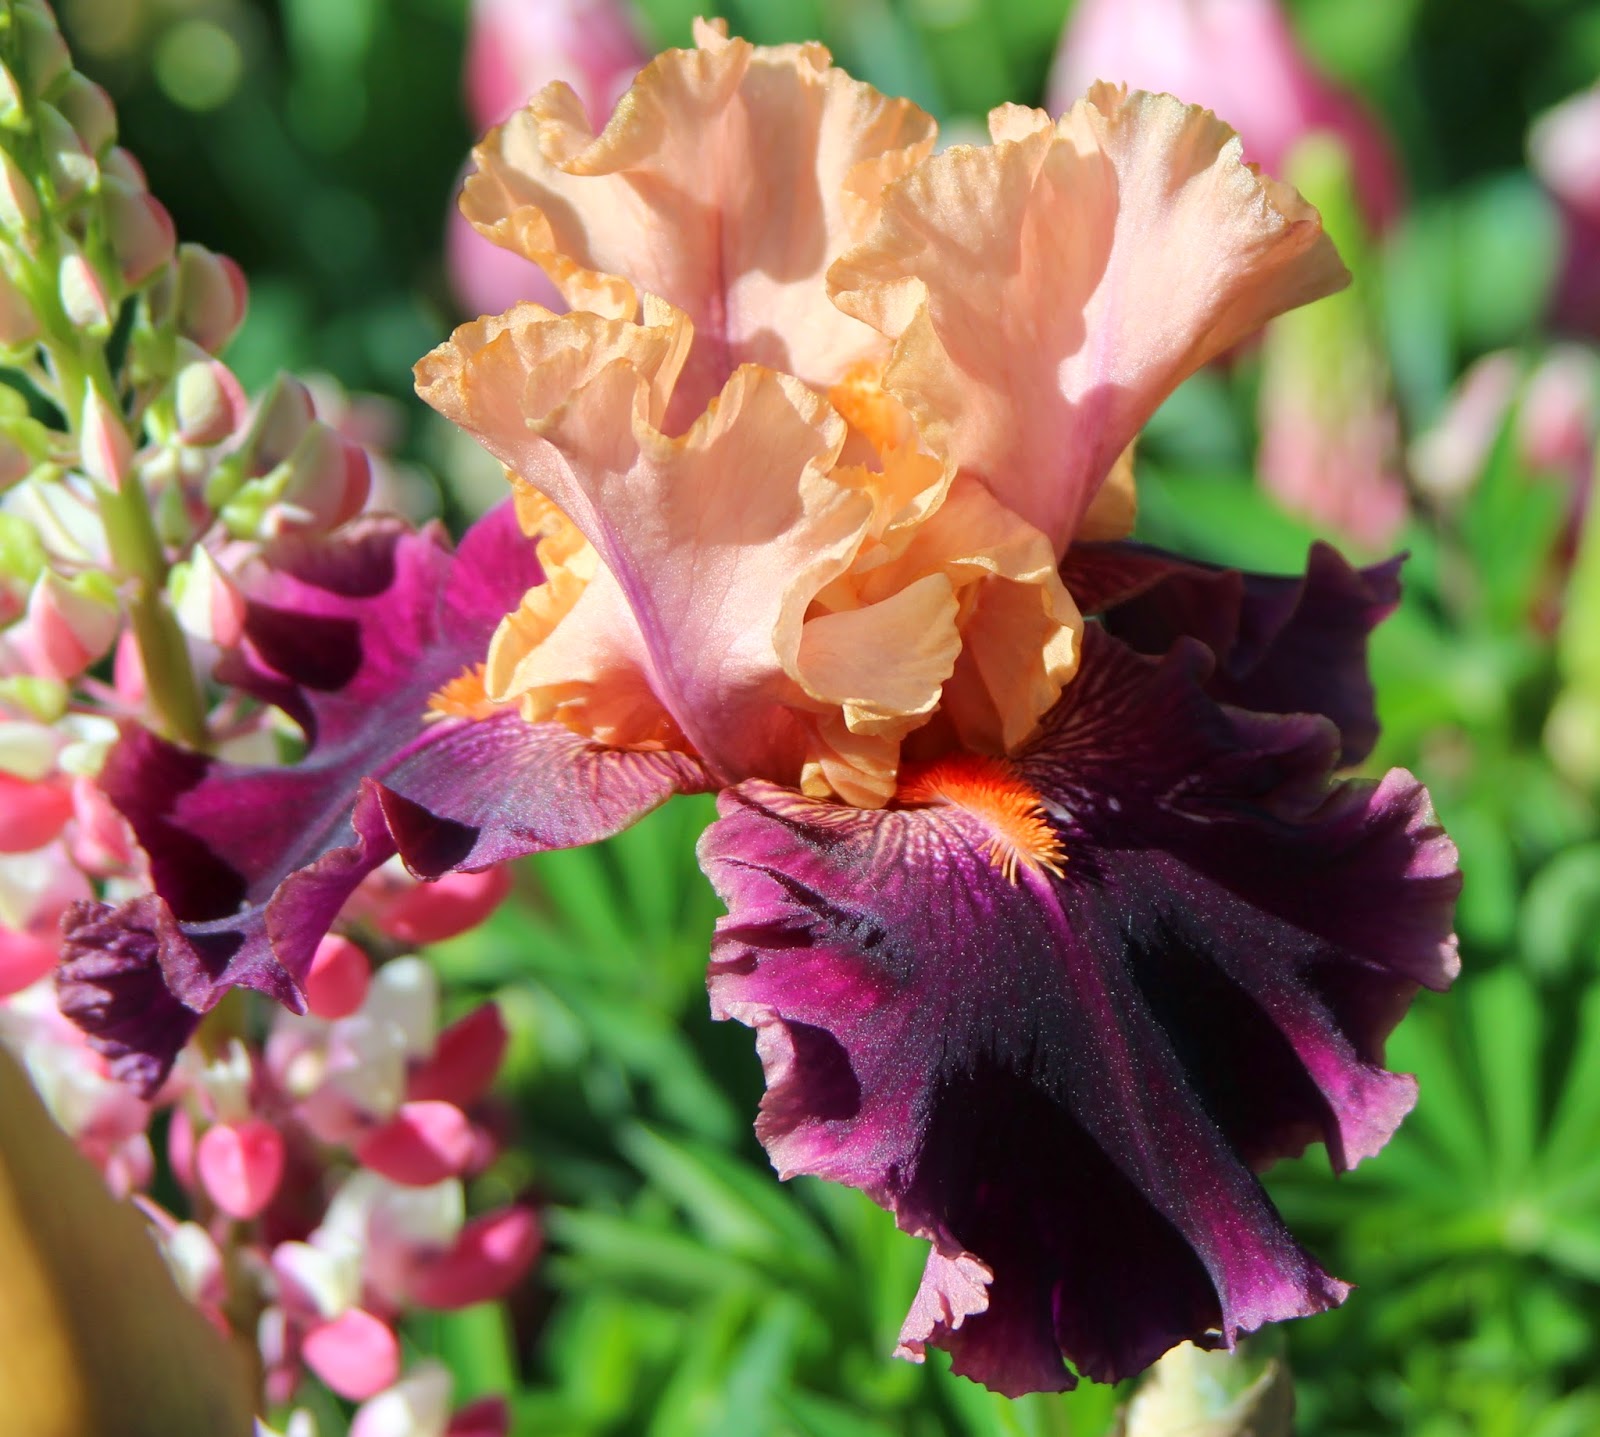 TALL BEARDED IRISES 2014 - Sowing the Seeds